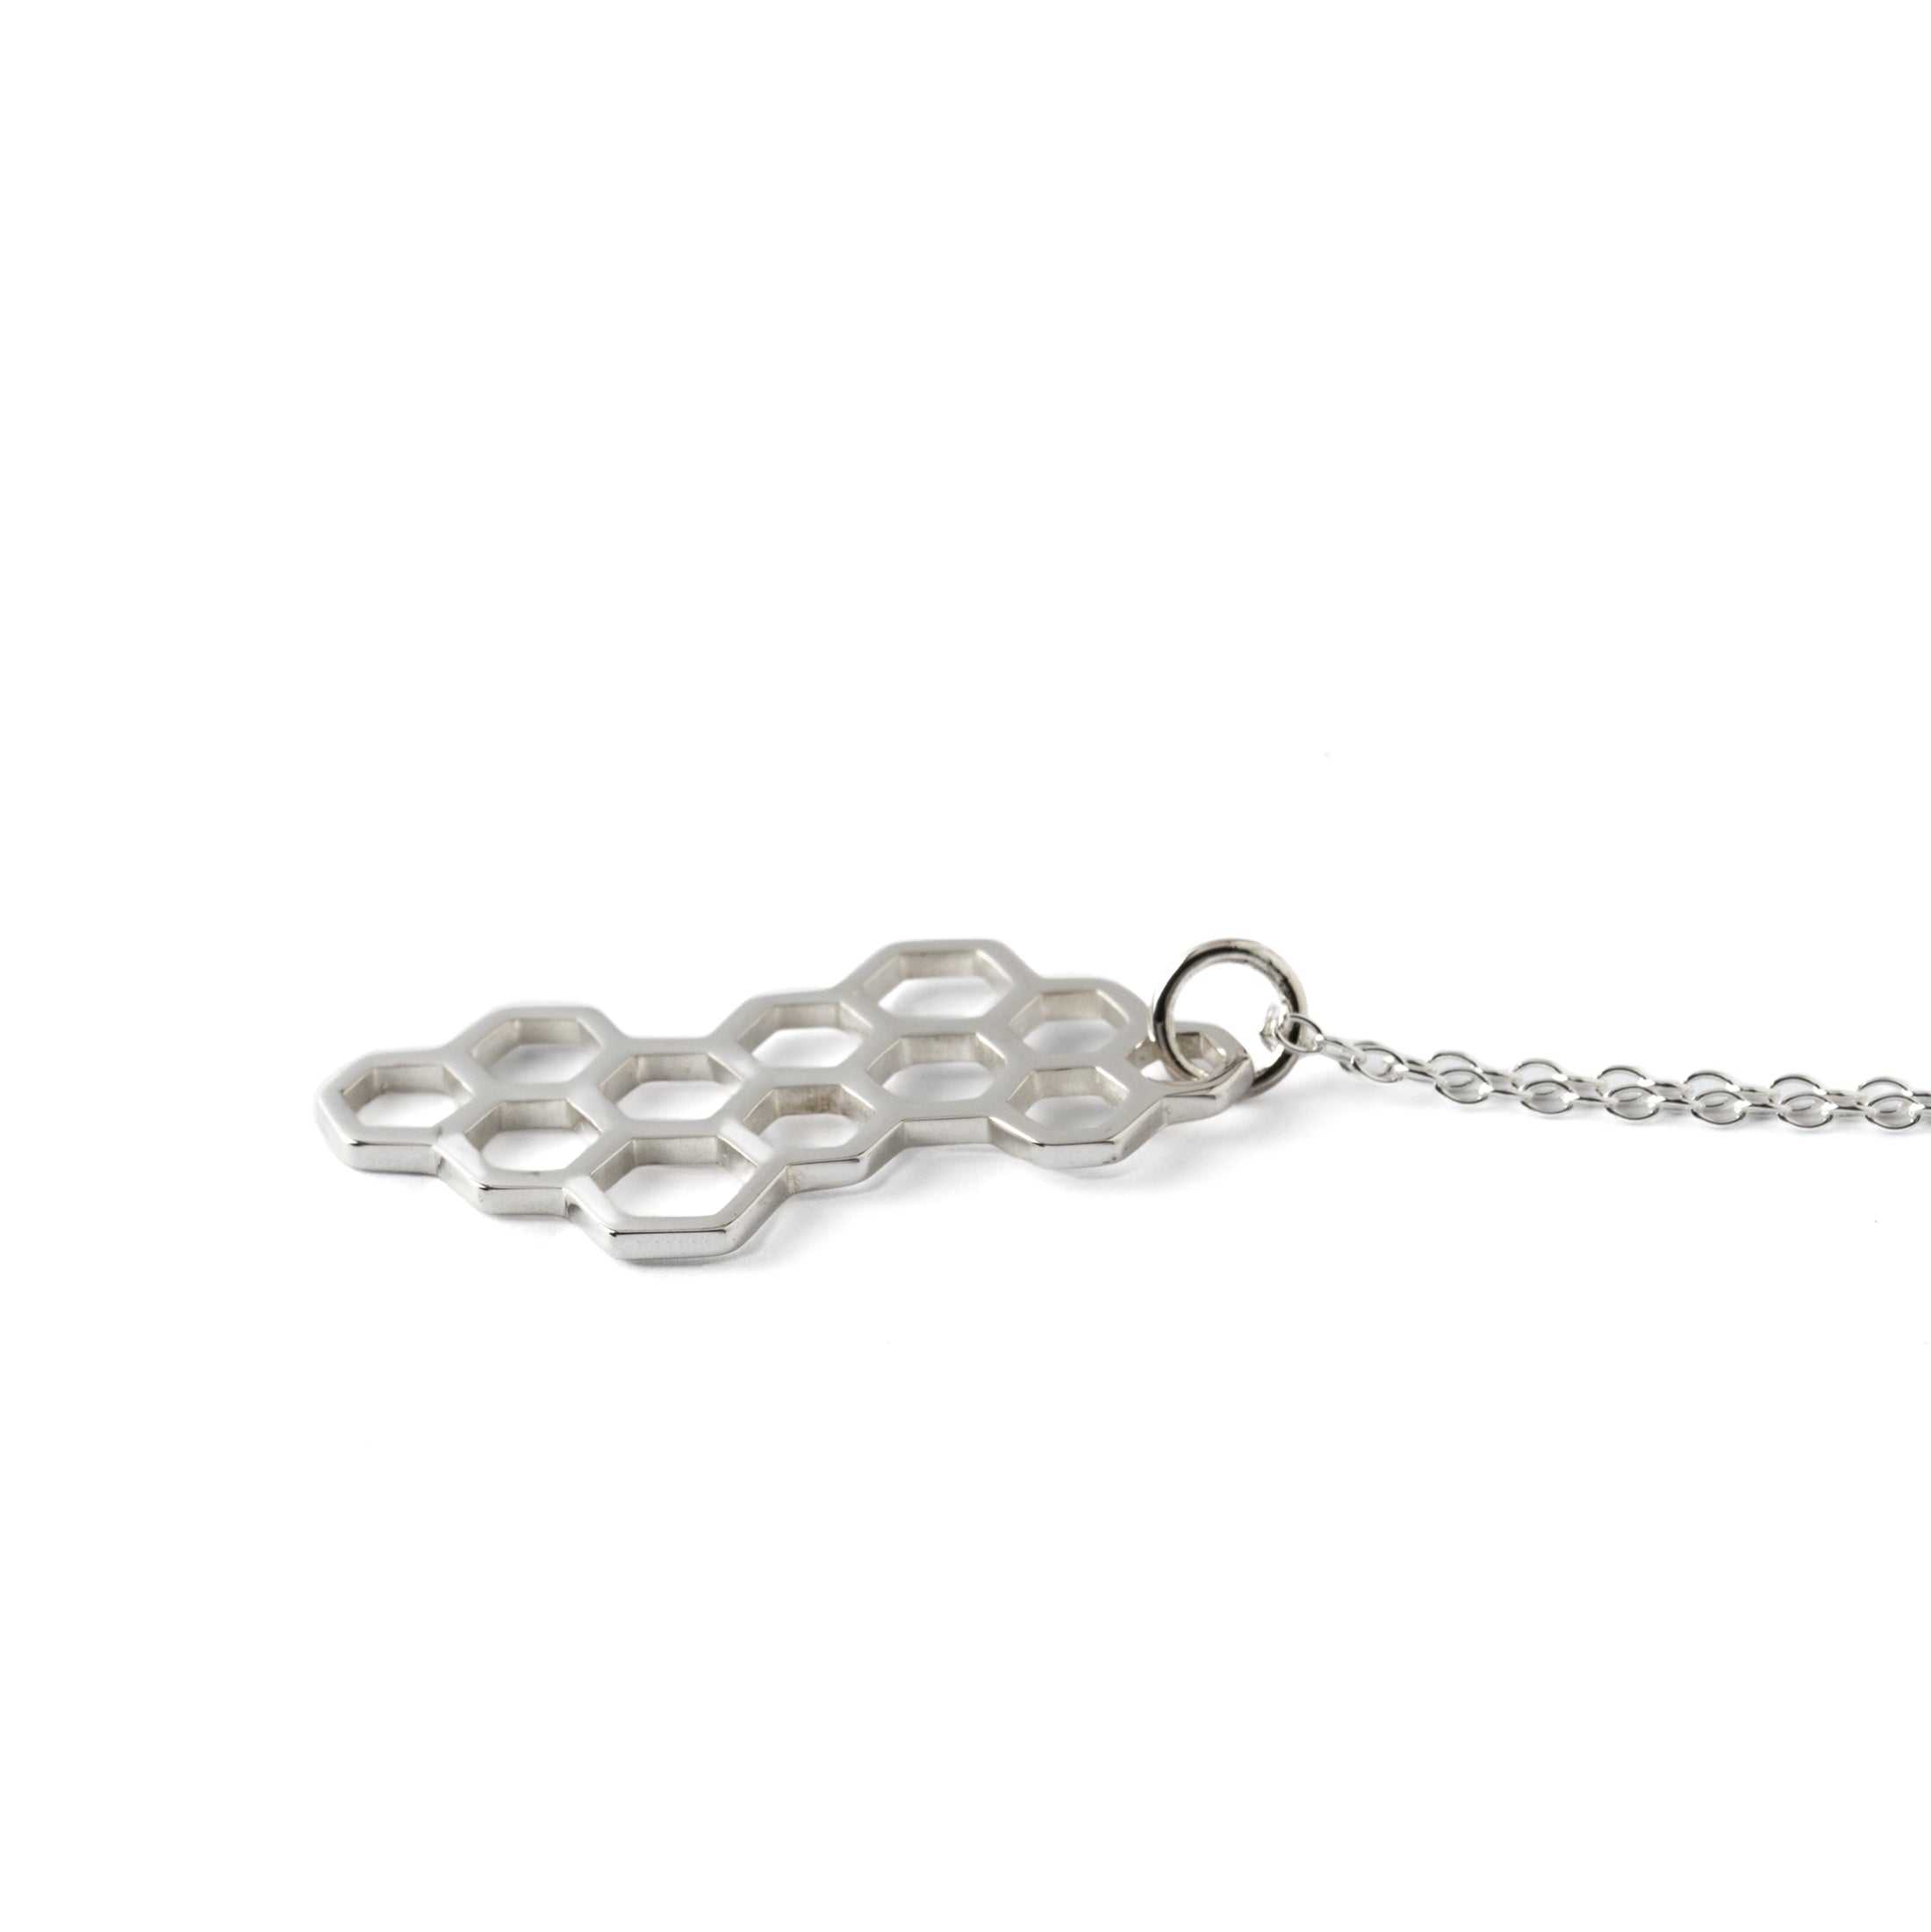 Honeycomb silver pendant necklace side view